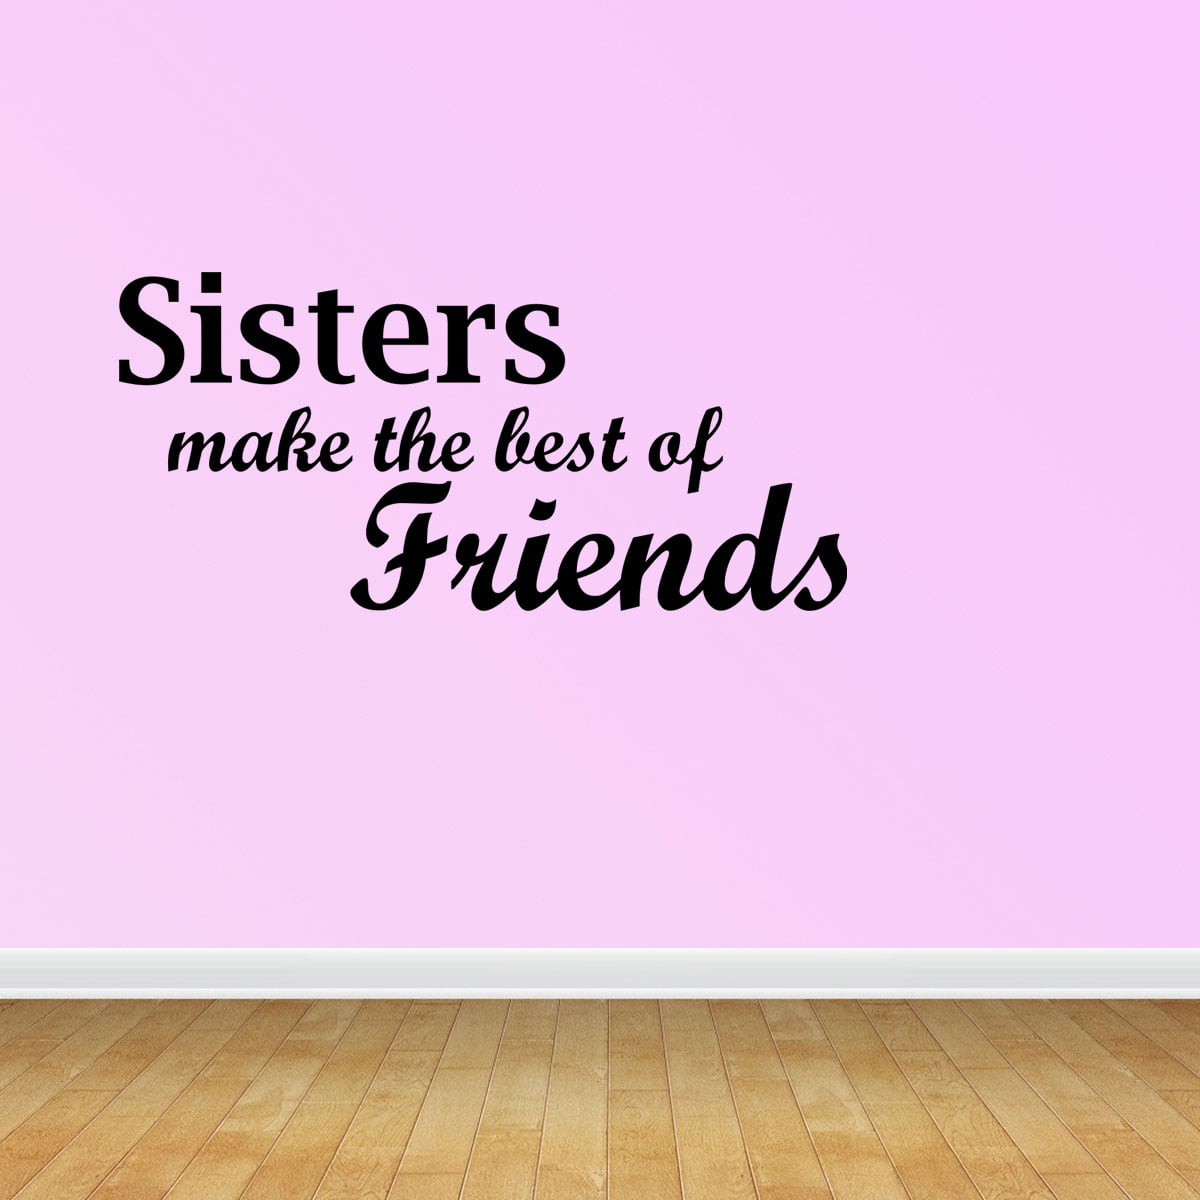 Details about   Sister Definition Decal 'Considered best friend for life' Vinyl Wall Decal